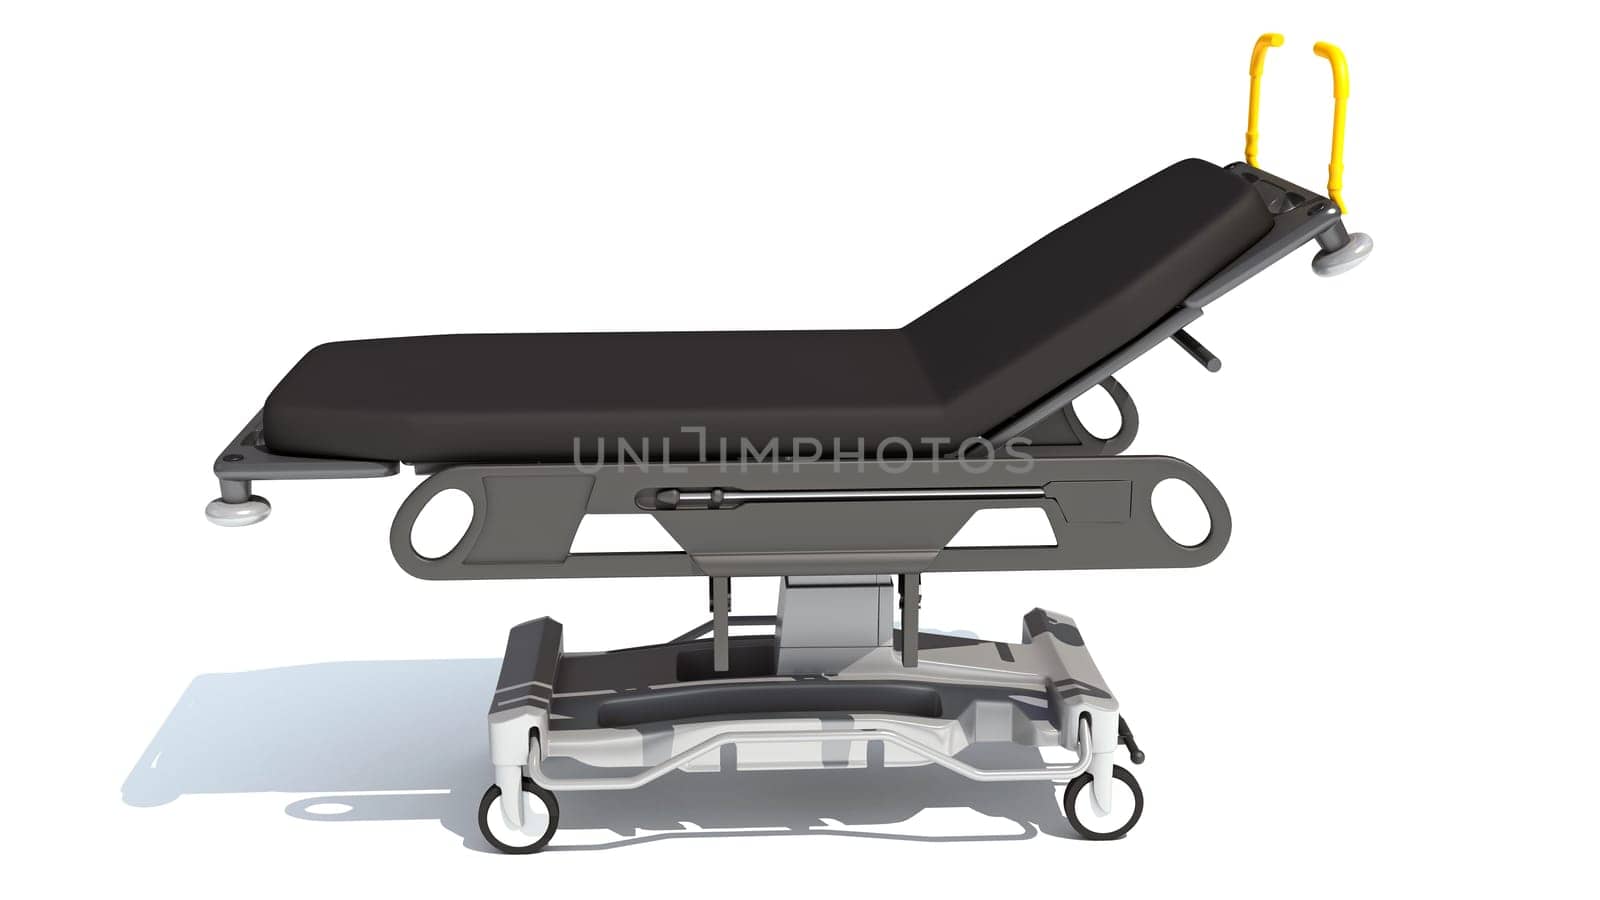 Medical Stretcher Trolley 3D rendering on white background by 3DHorse